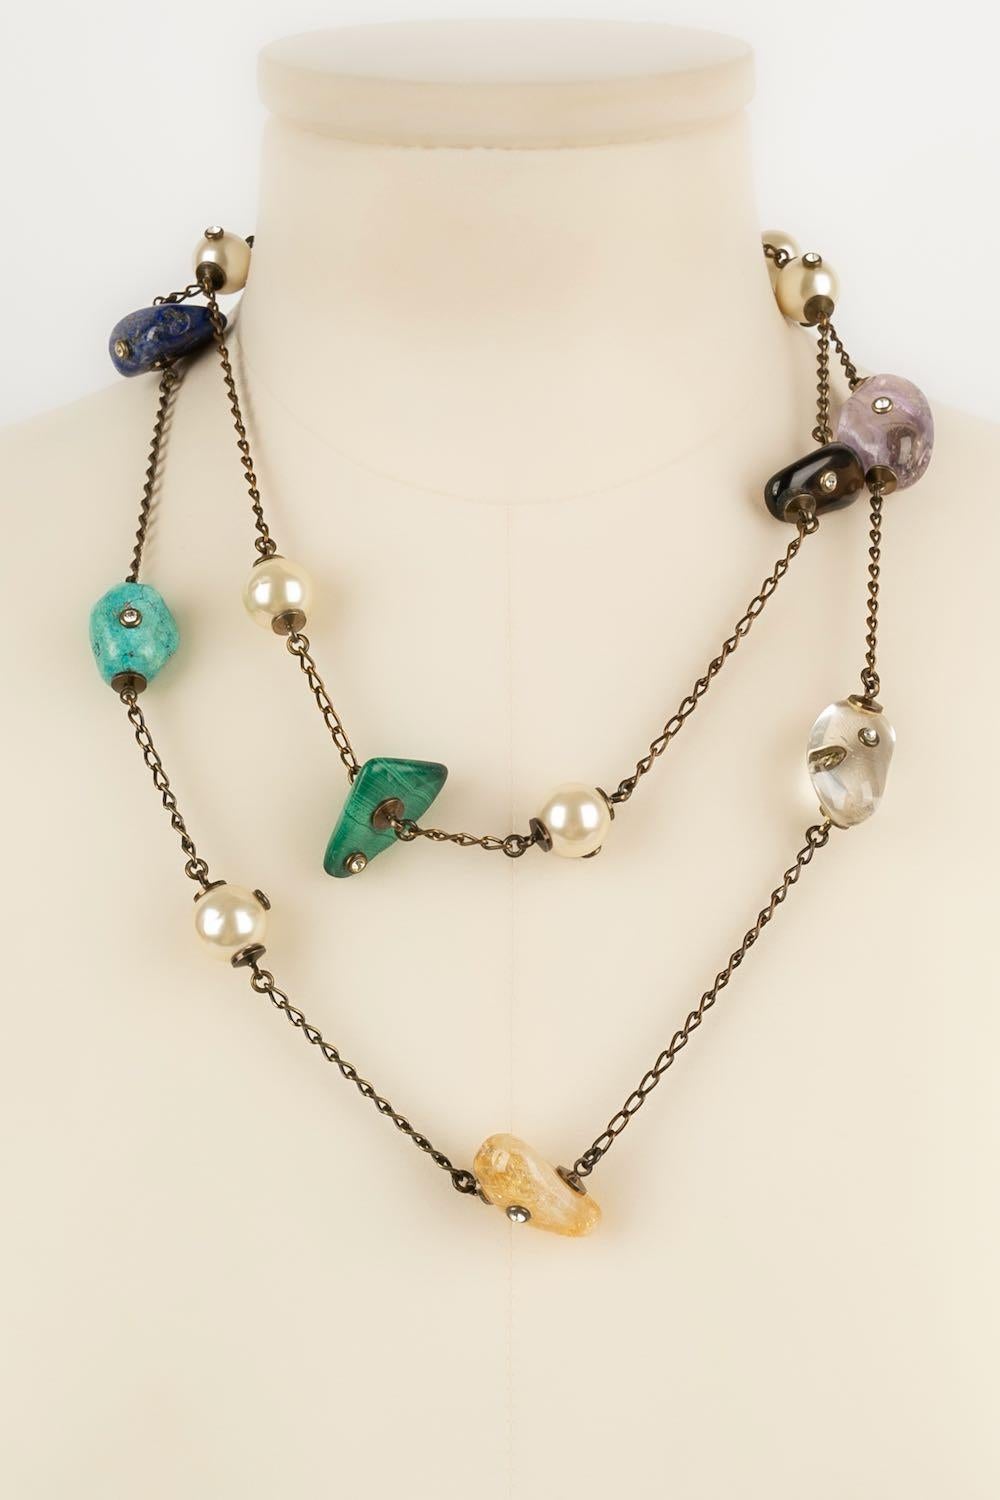 Women's Chanel Necklace in Copper Plated Metal and Hard Stone Beads